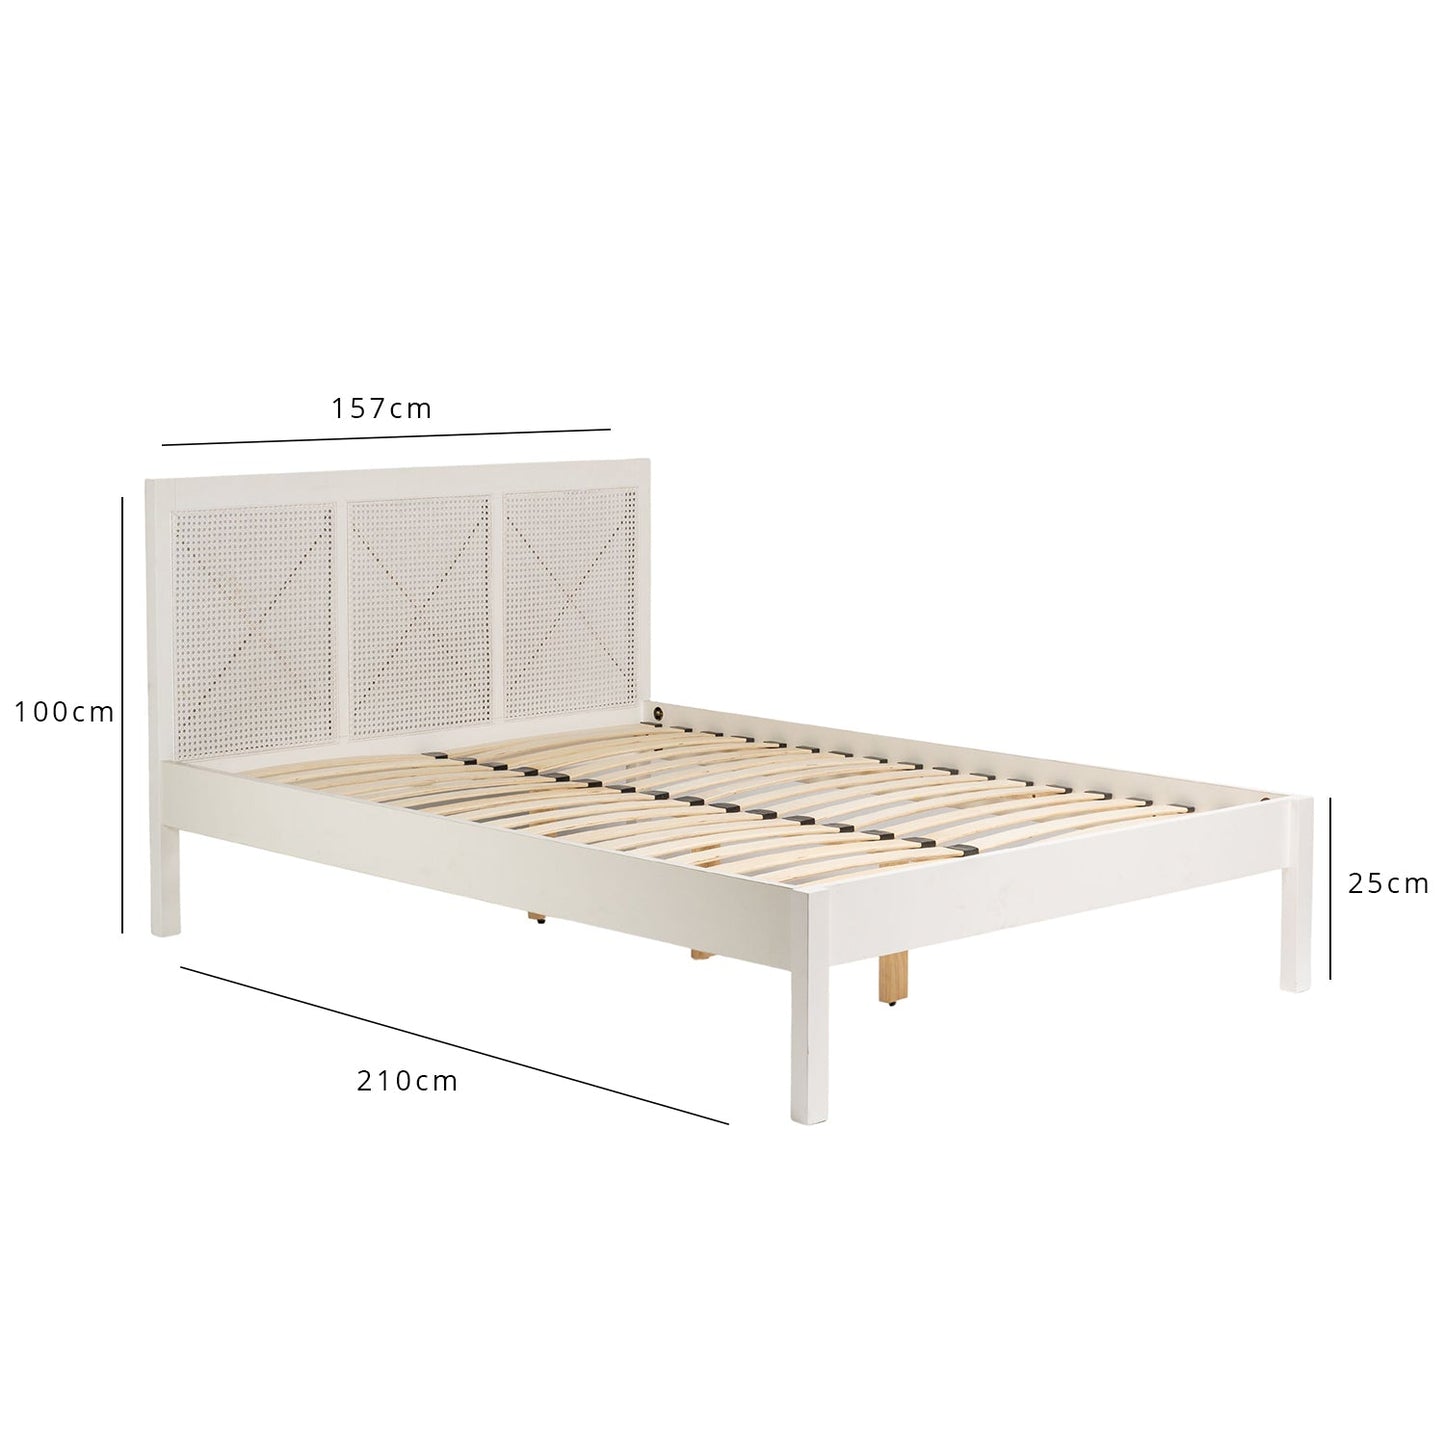 Charlie king bed and mattress set - white - Laura James